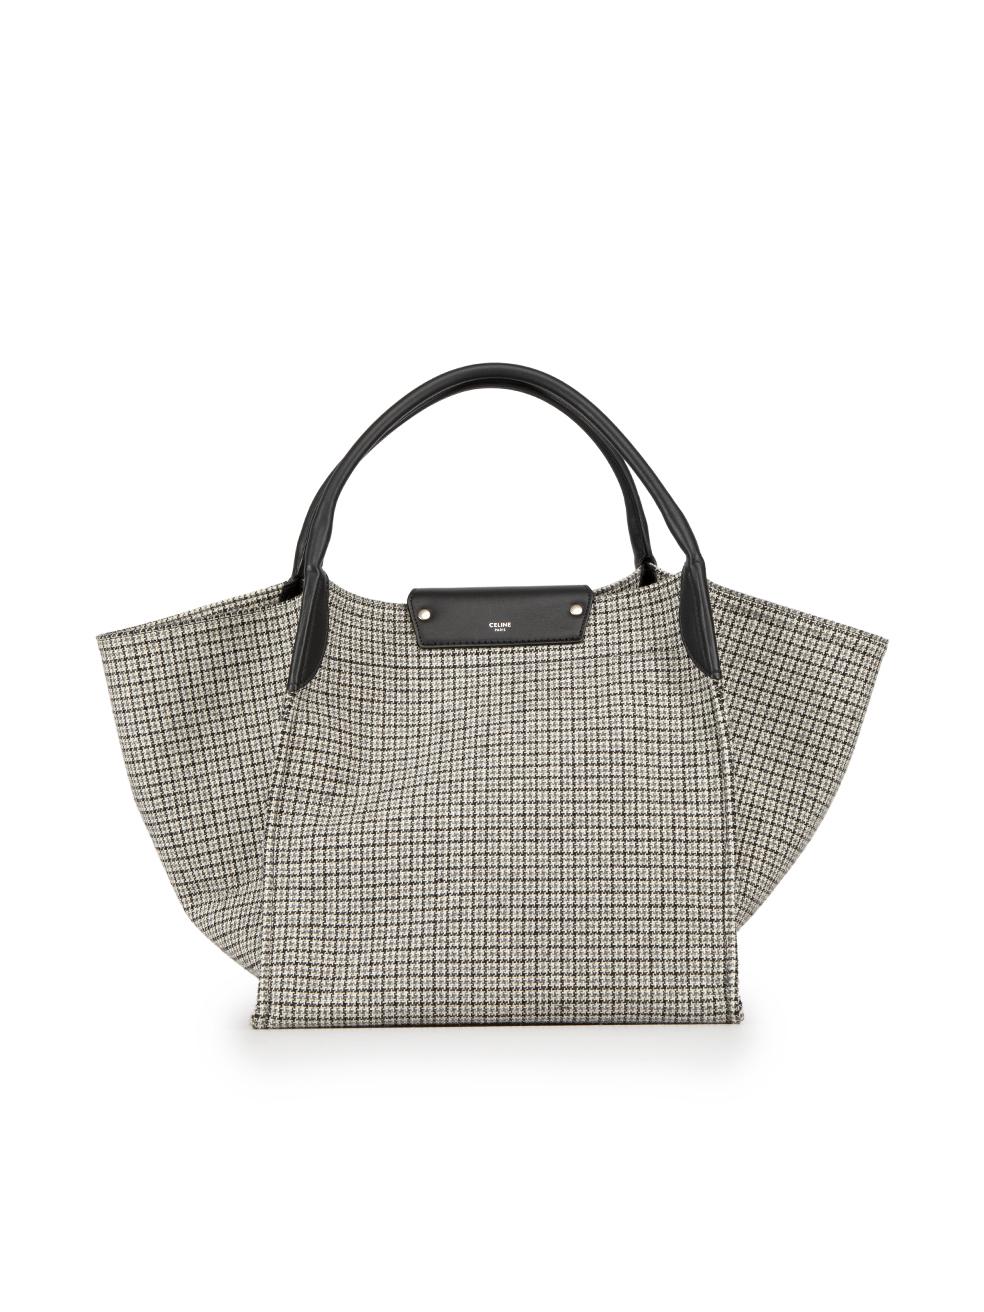 Celine Grey Wool Houndstooth Big Bag Tote In Excellent Condition In London, GB